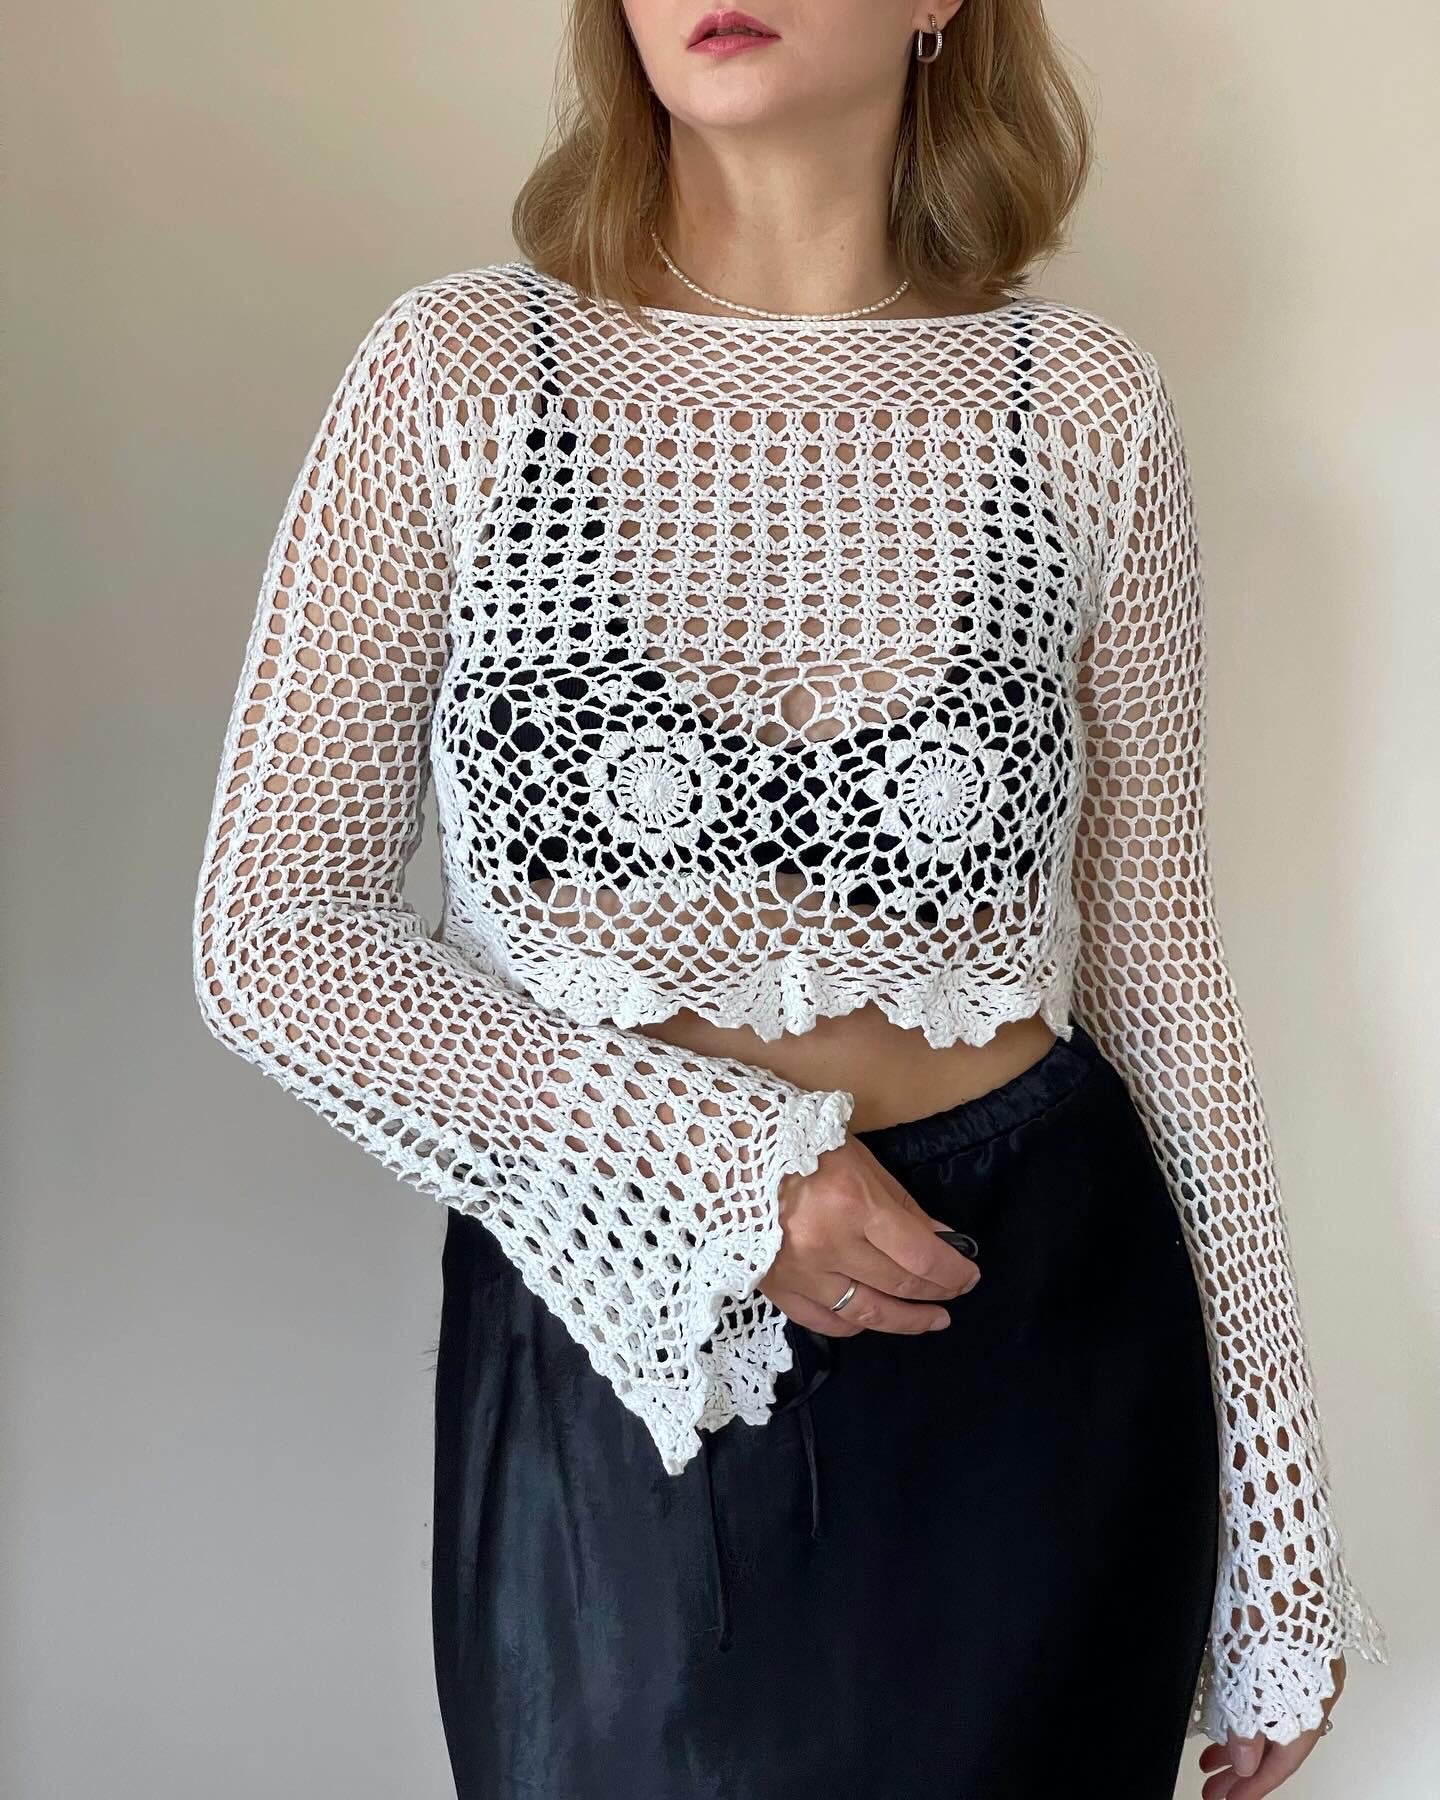 Lovely crochet crop top in an off-white color